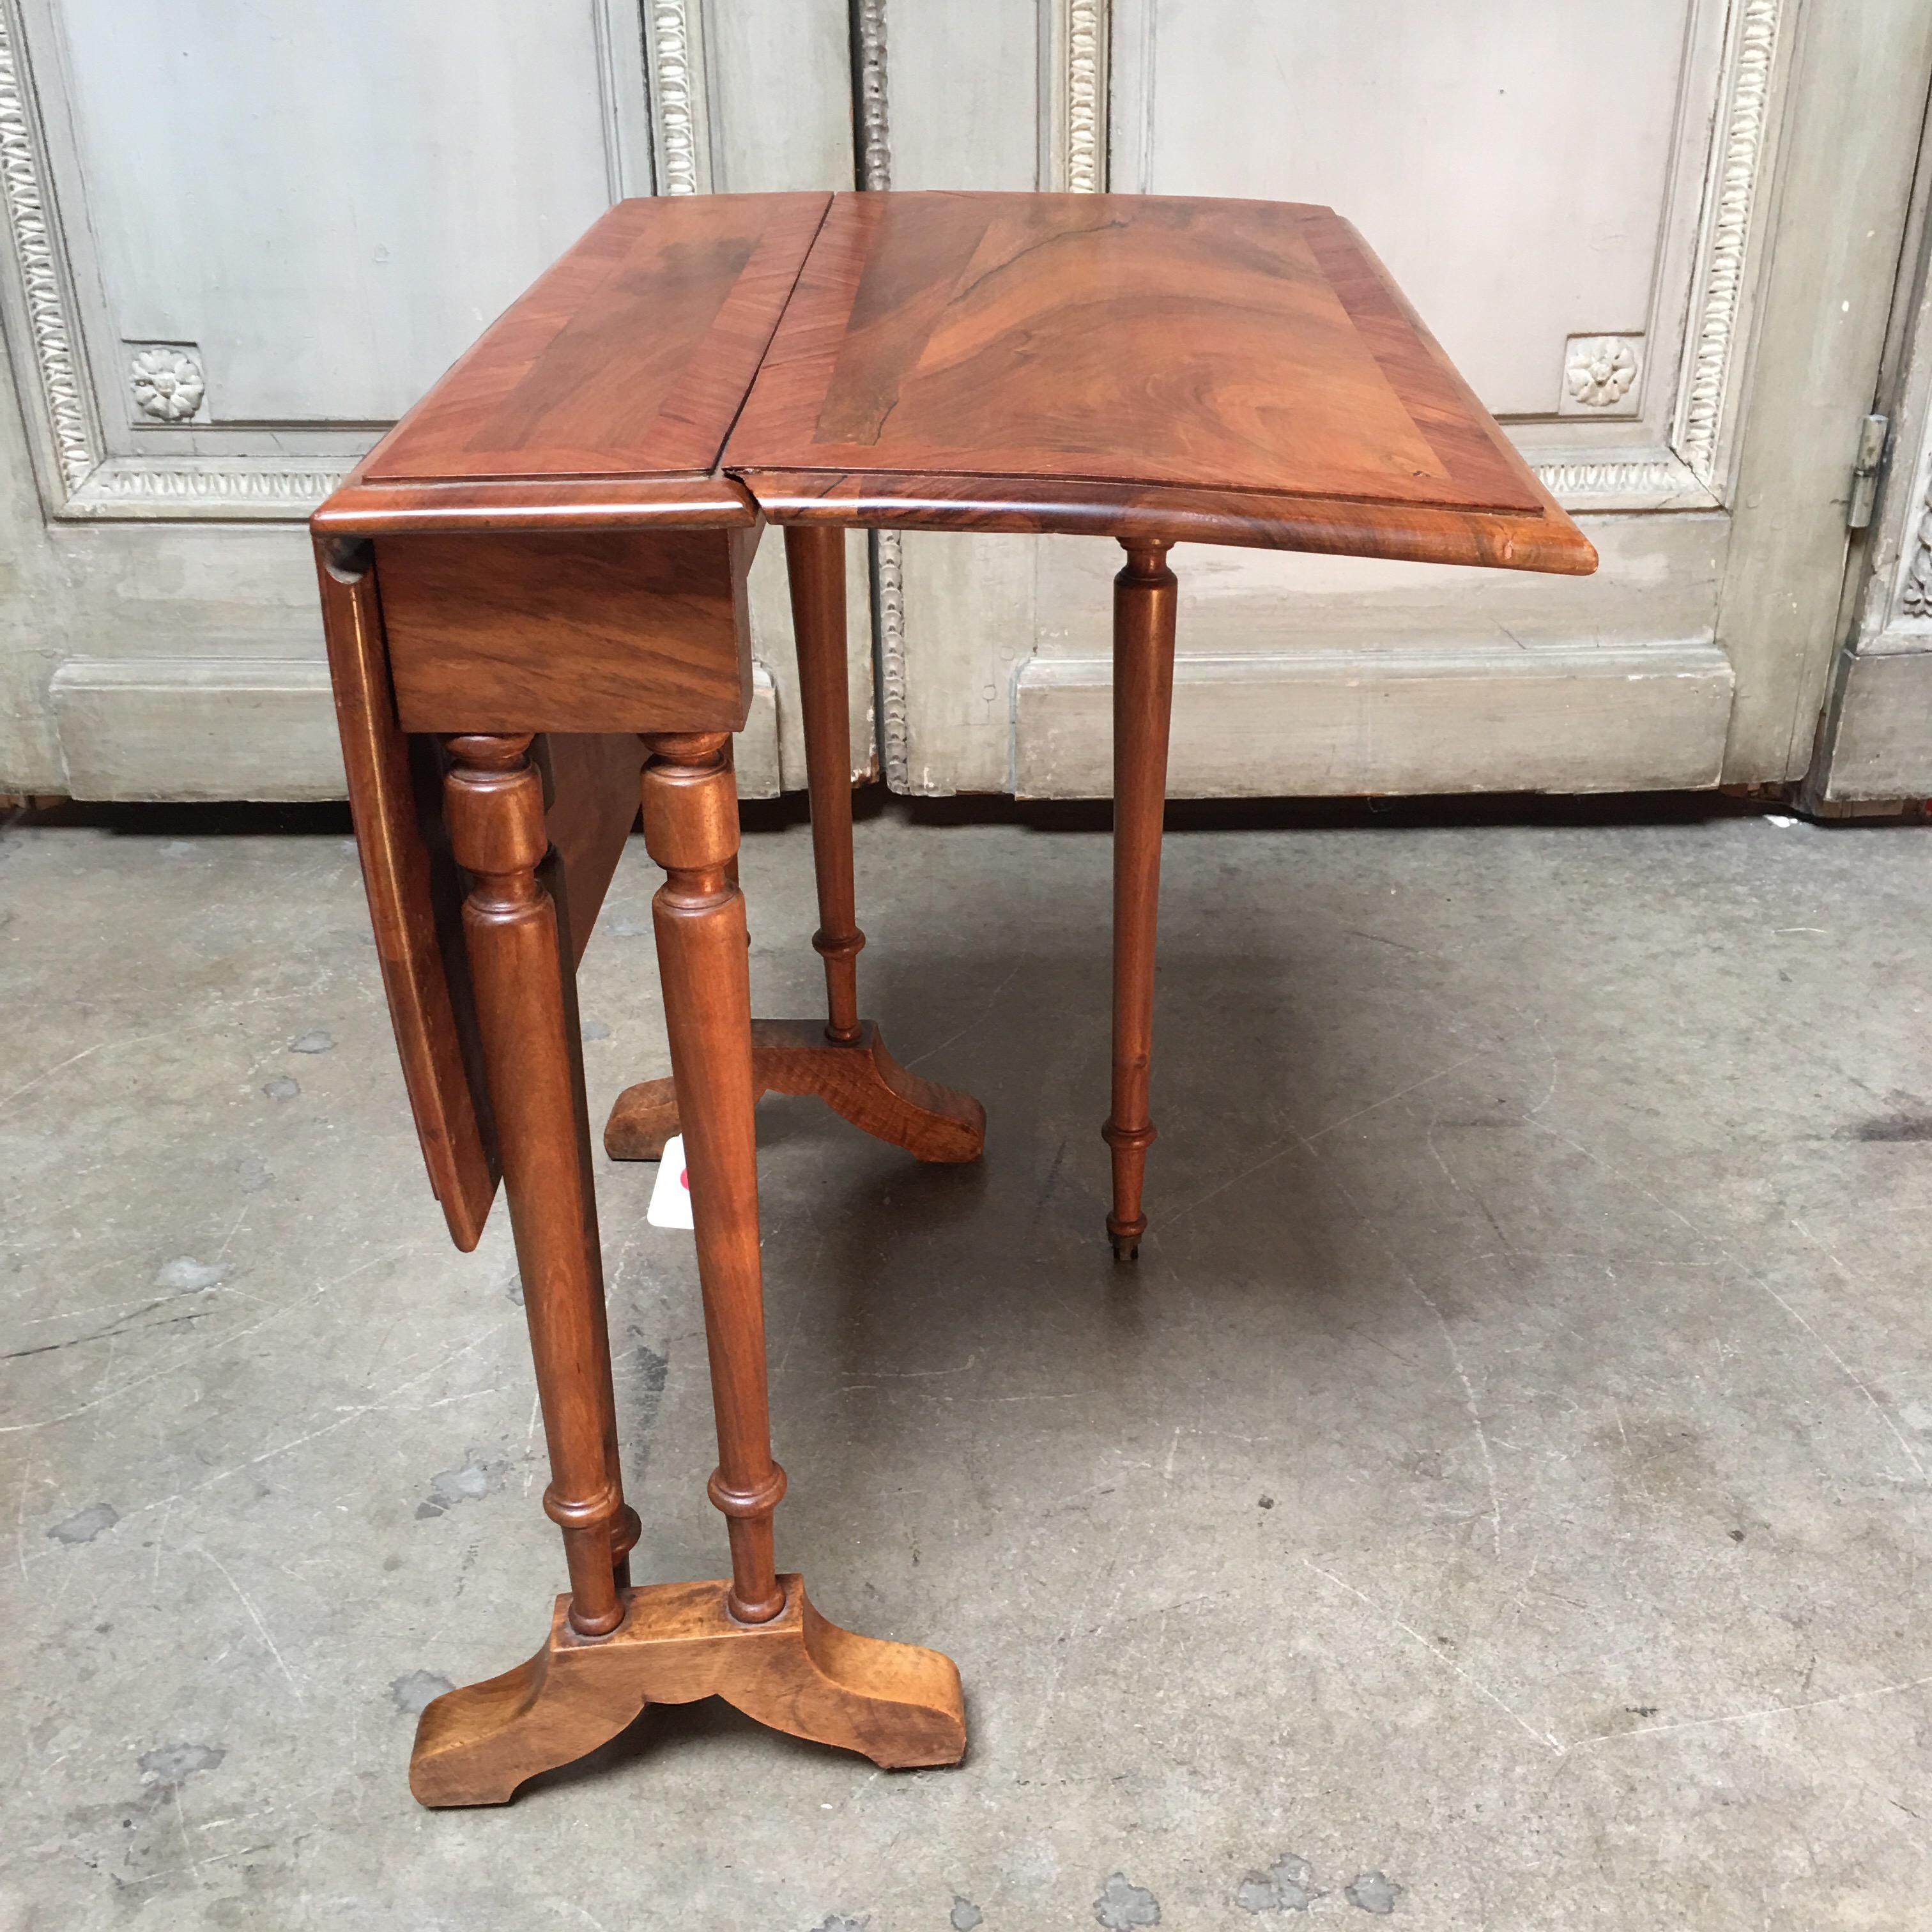 19th Century English Sutherland Drop-Leaf Table in Walnut and Kingwood Veneer For Sale 2